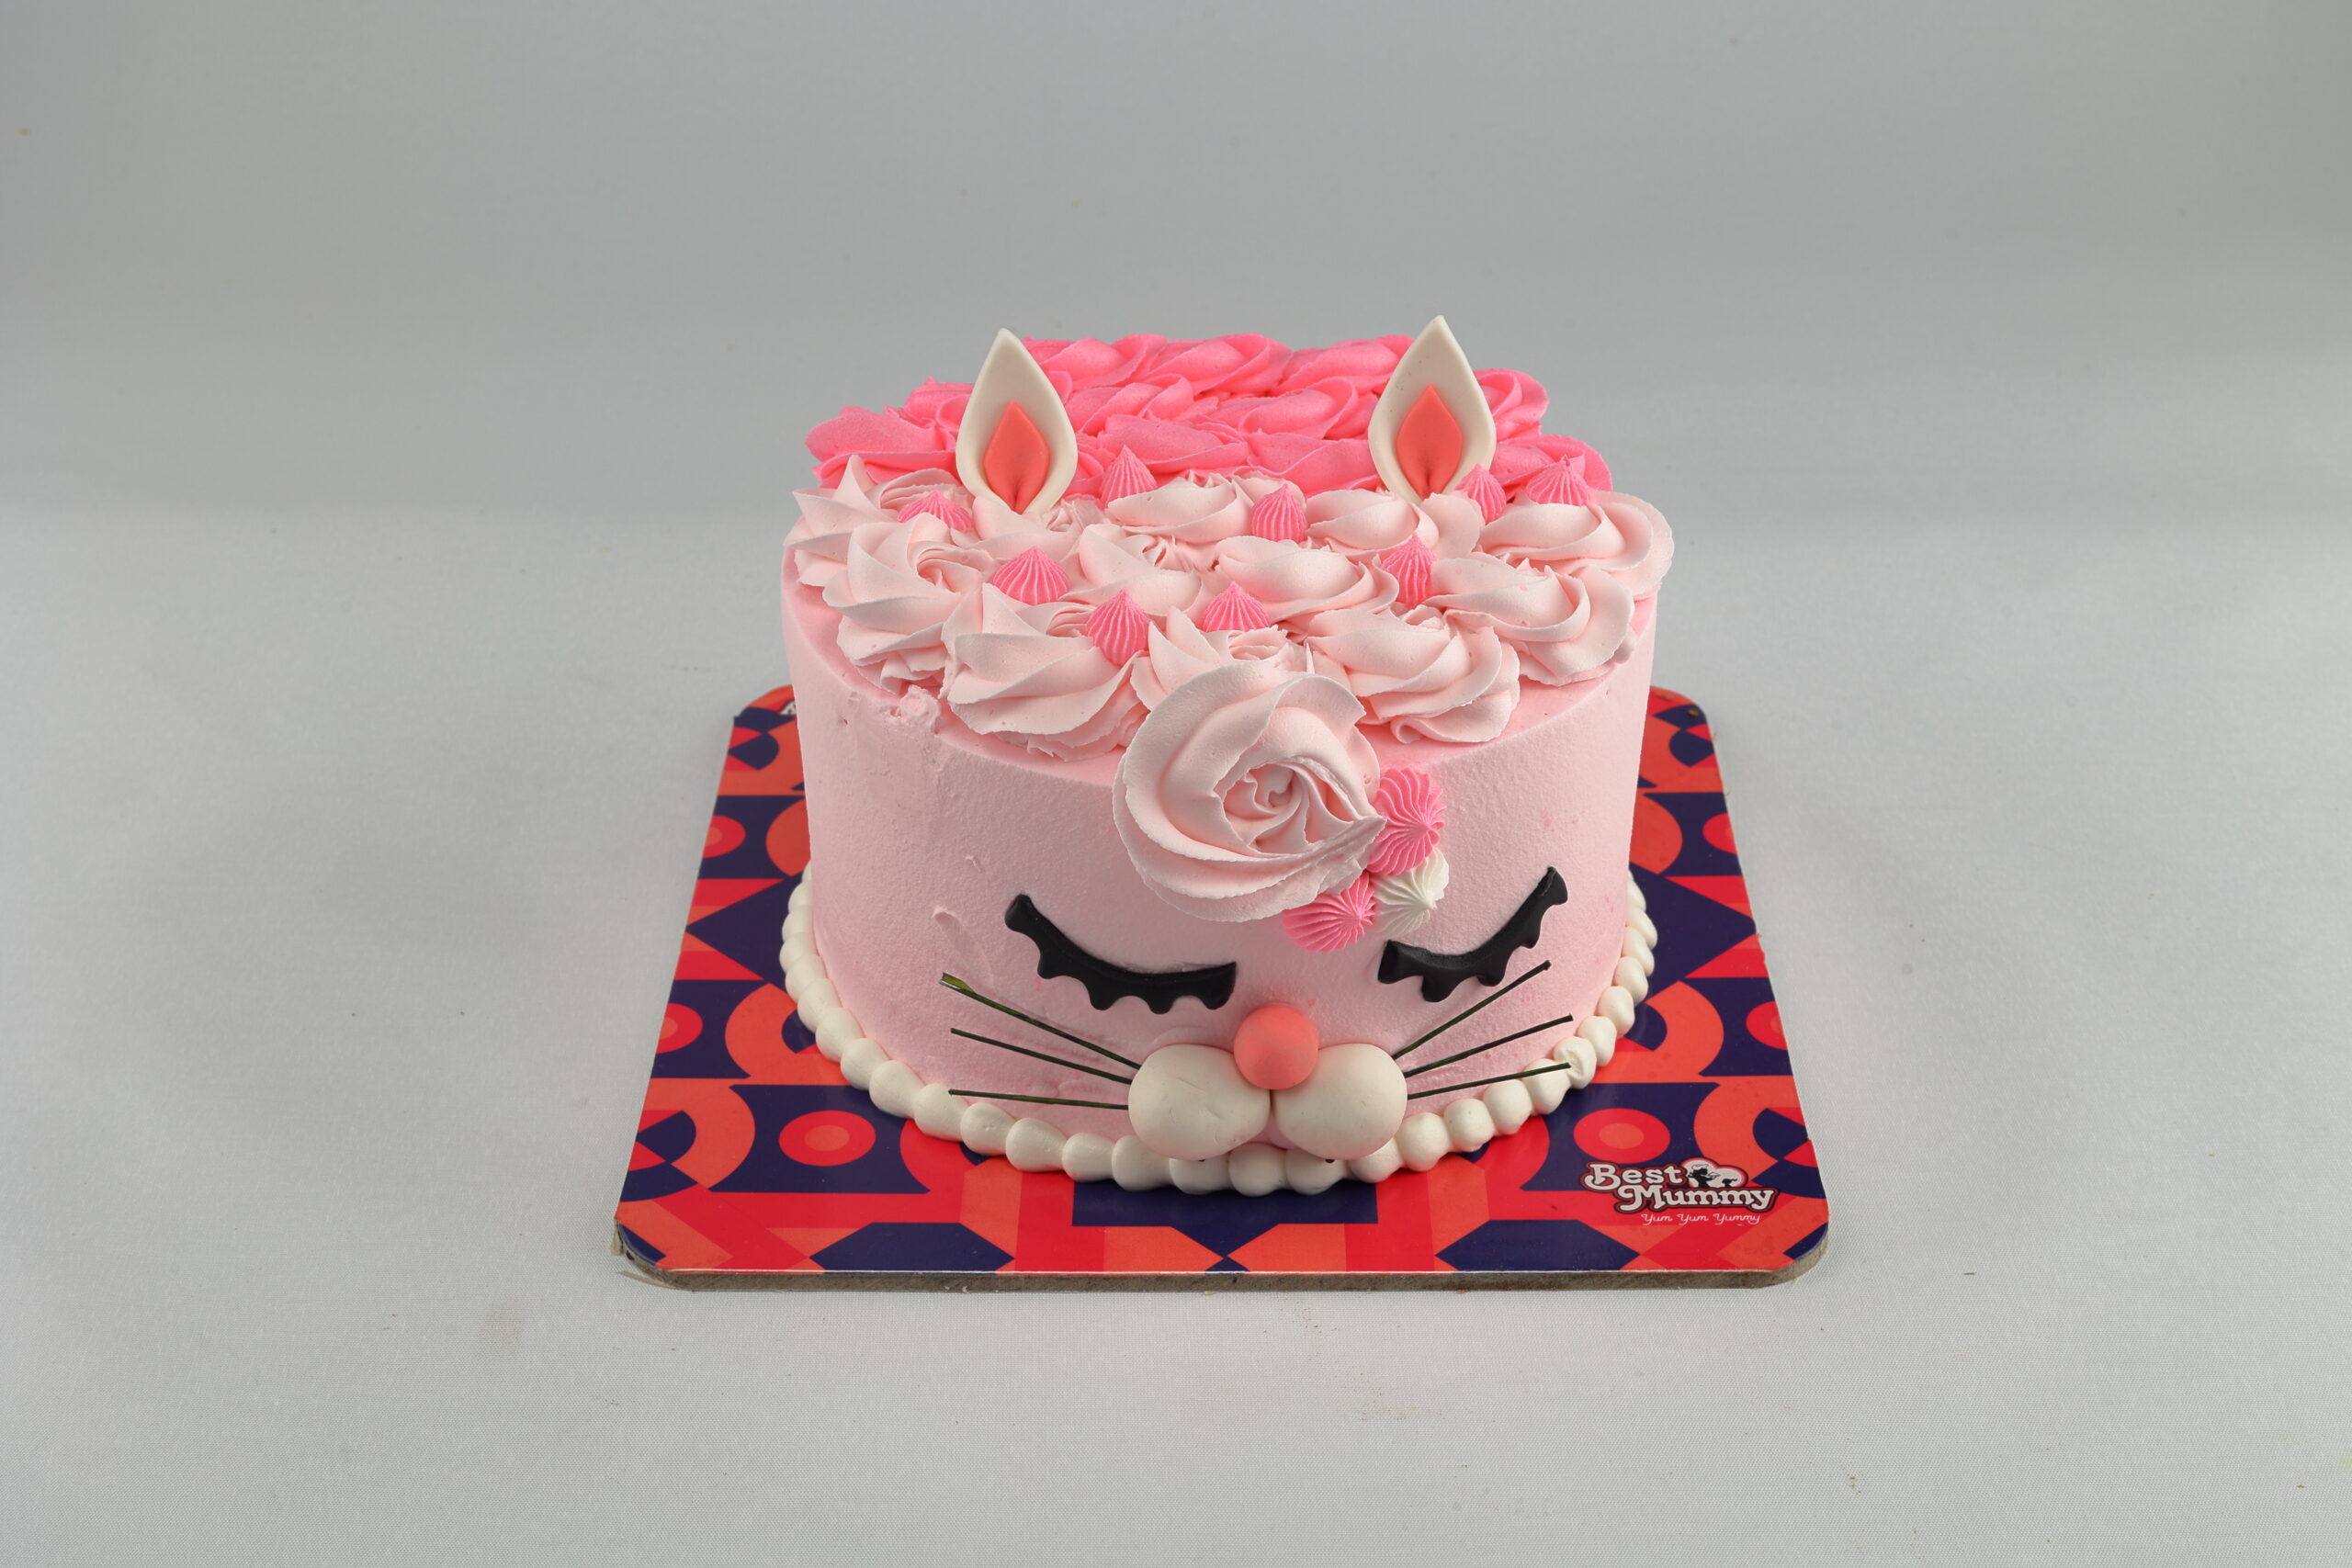 Kitty Theme Cake - order online cake in coimbatore - Friend In knead